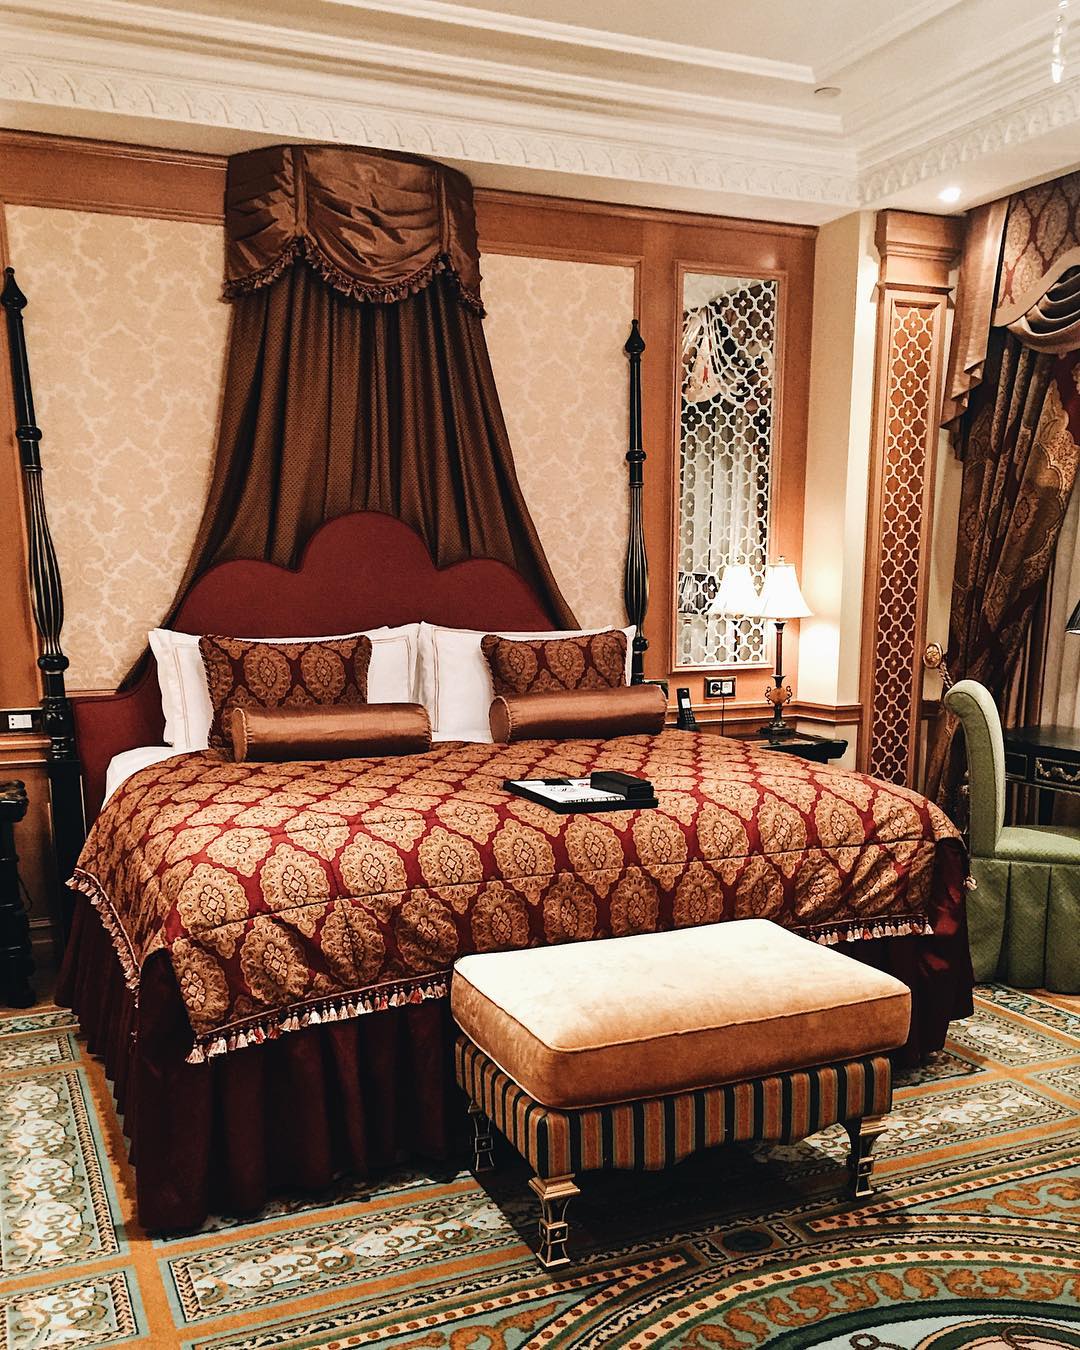 Presidential Suite is one of the most luxurious suites in...